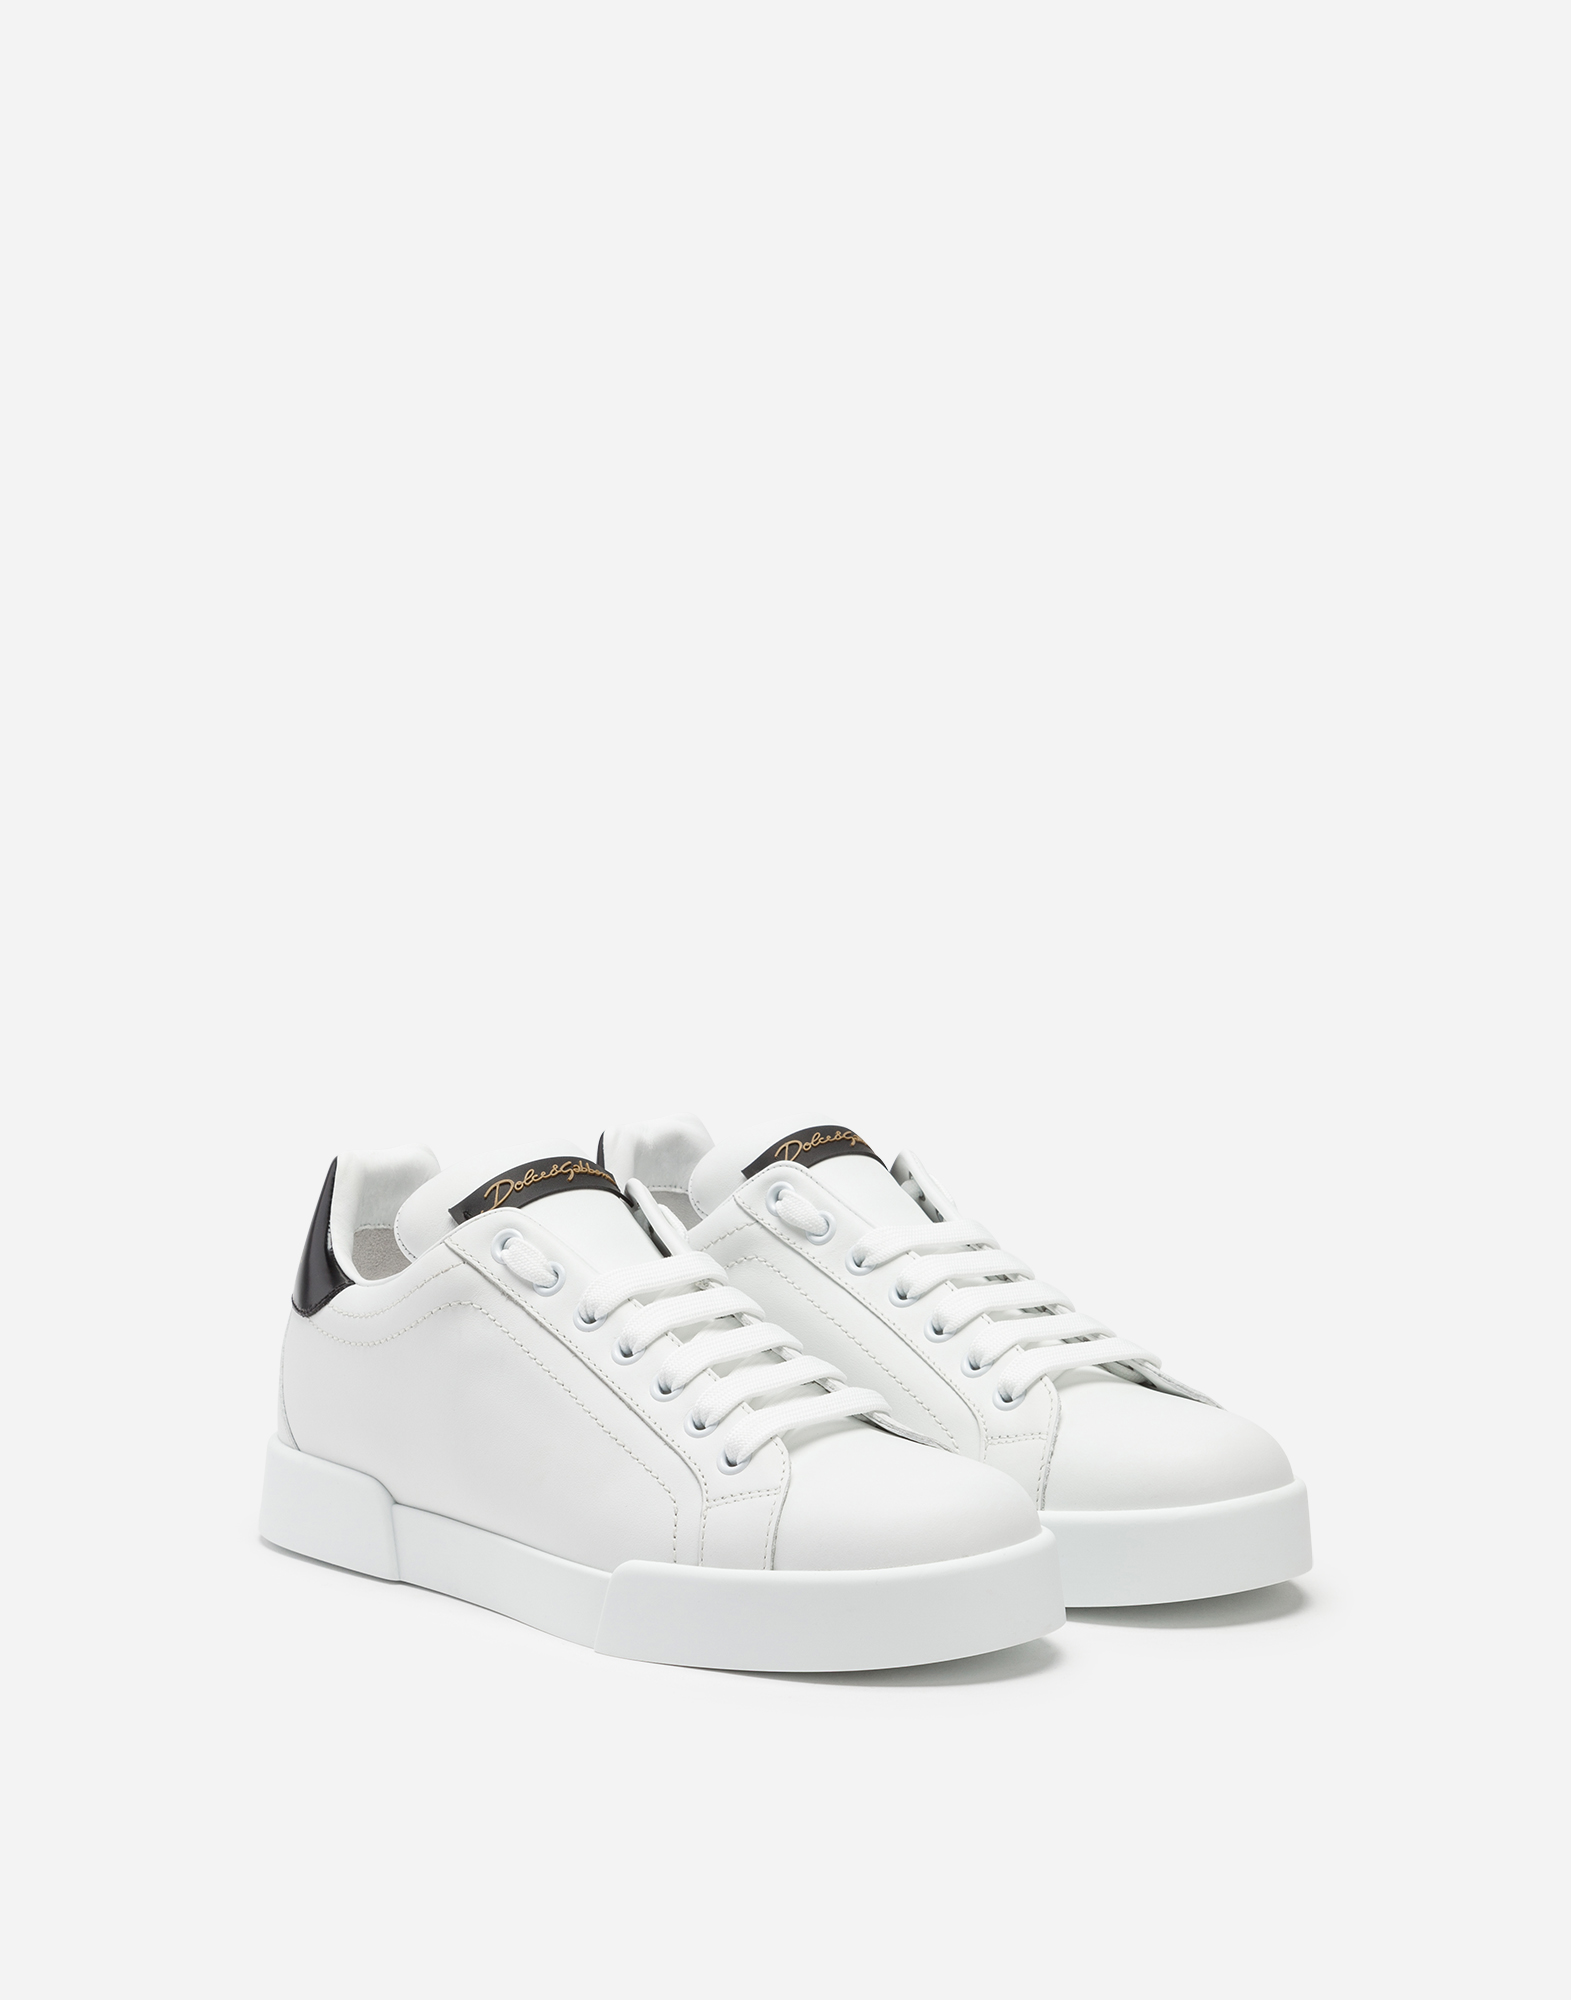 dolce and gabbana mens white shoes